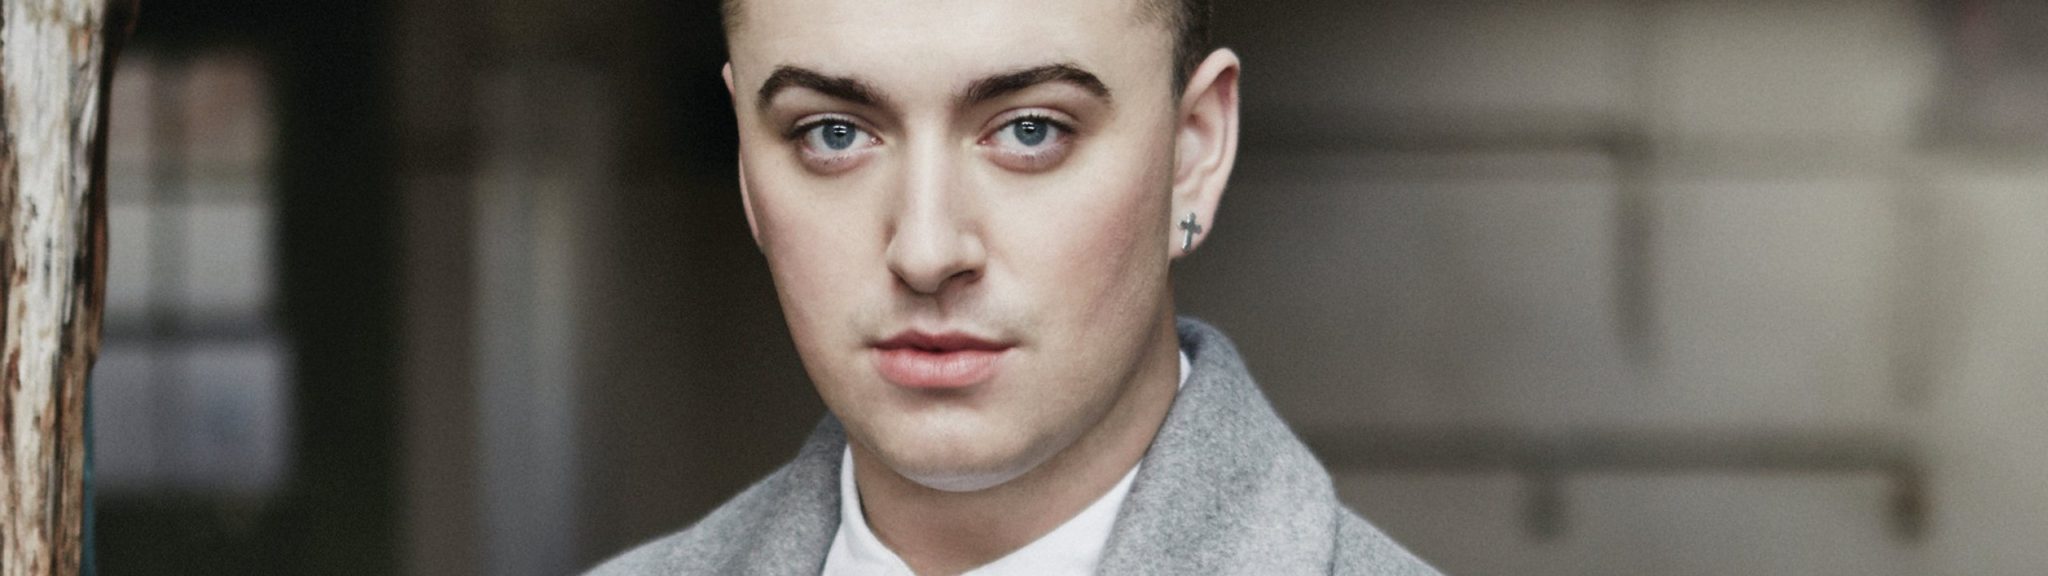 Download Wallpaper By Size - Sam Smith , HD Wallpaper & Backgrounds